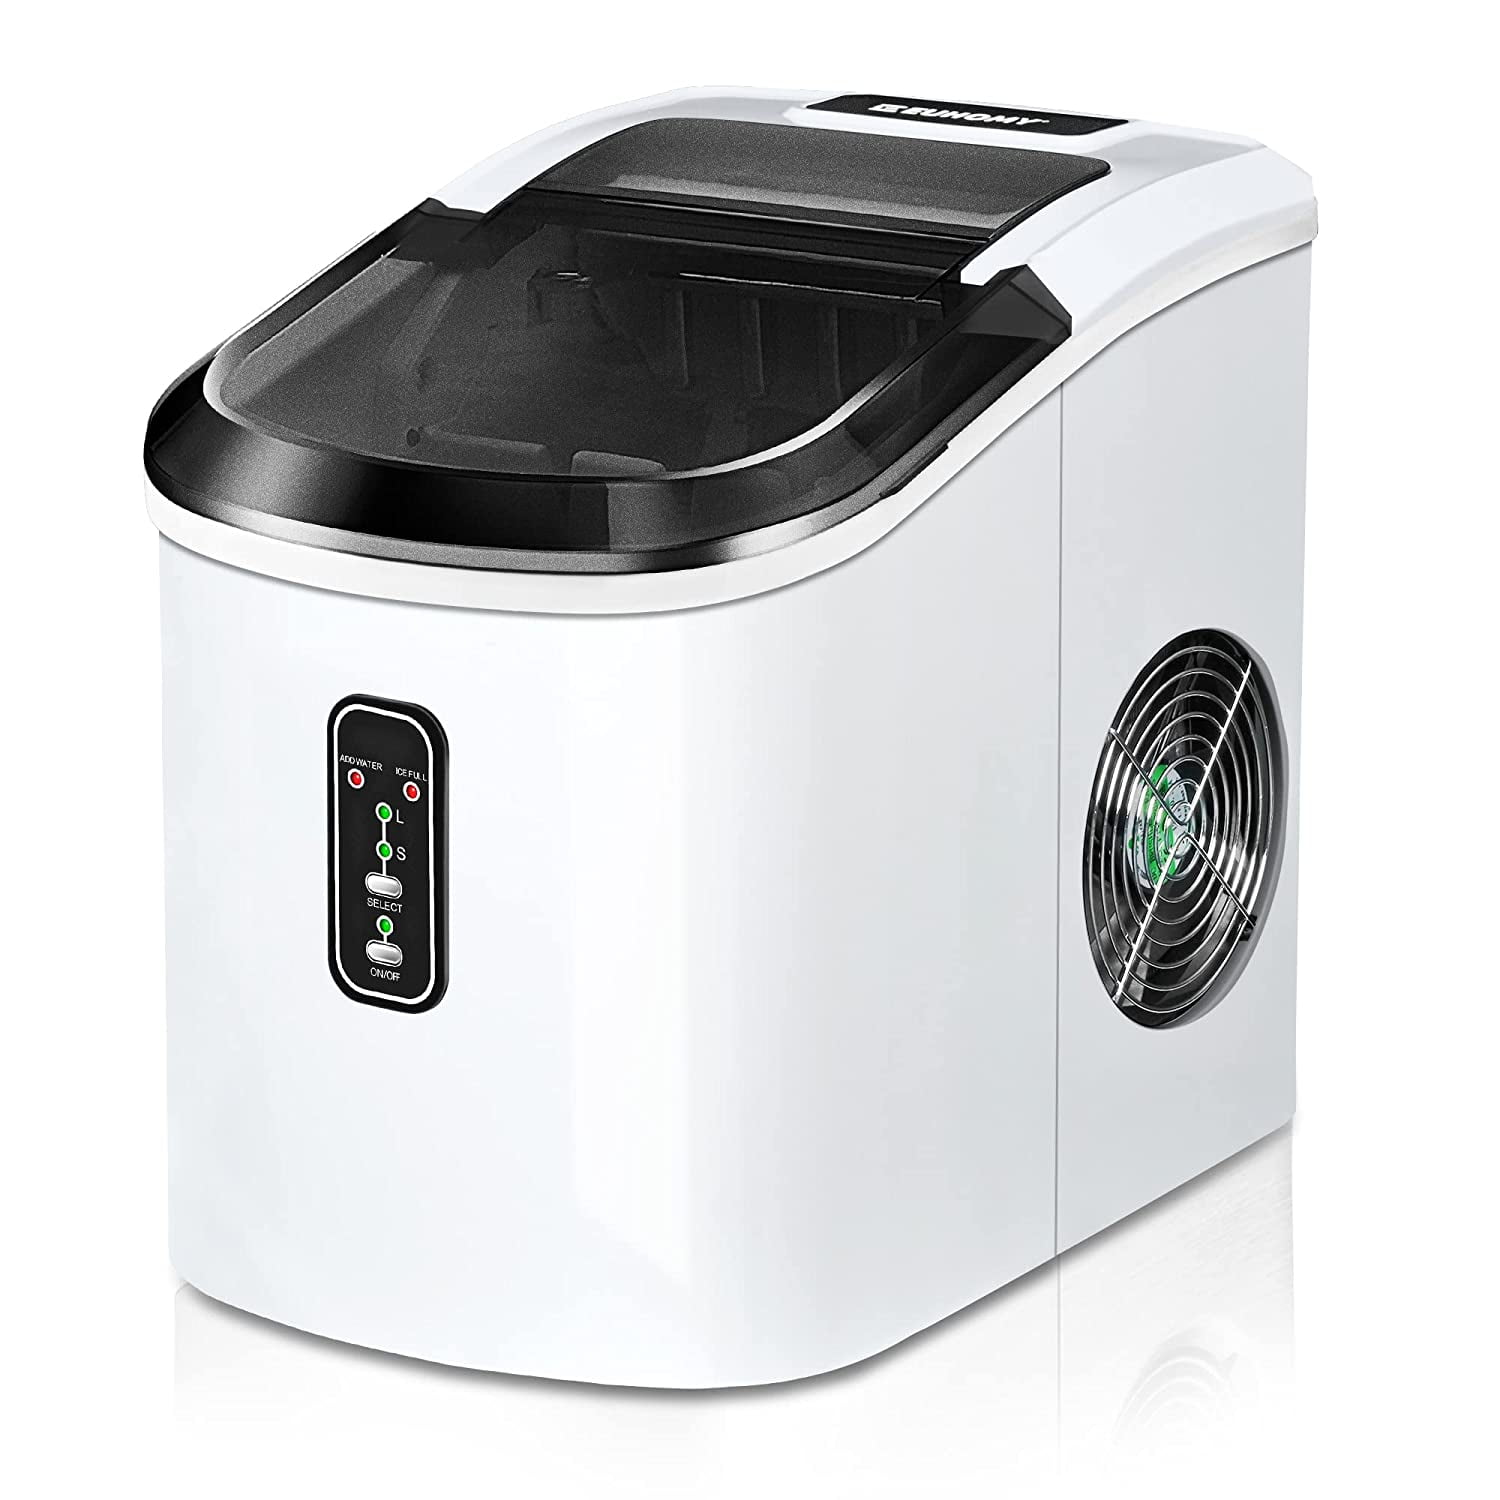  Countertop Ice Makers Machine 26.5 LBS/24 Hour Electric  Portable Ice Making Machine with Self-Cleaning, 9 Ice Cubes Ready in 6 Min  Ice Cube Machine #304 Food Grade Stainless Steel : Appliances